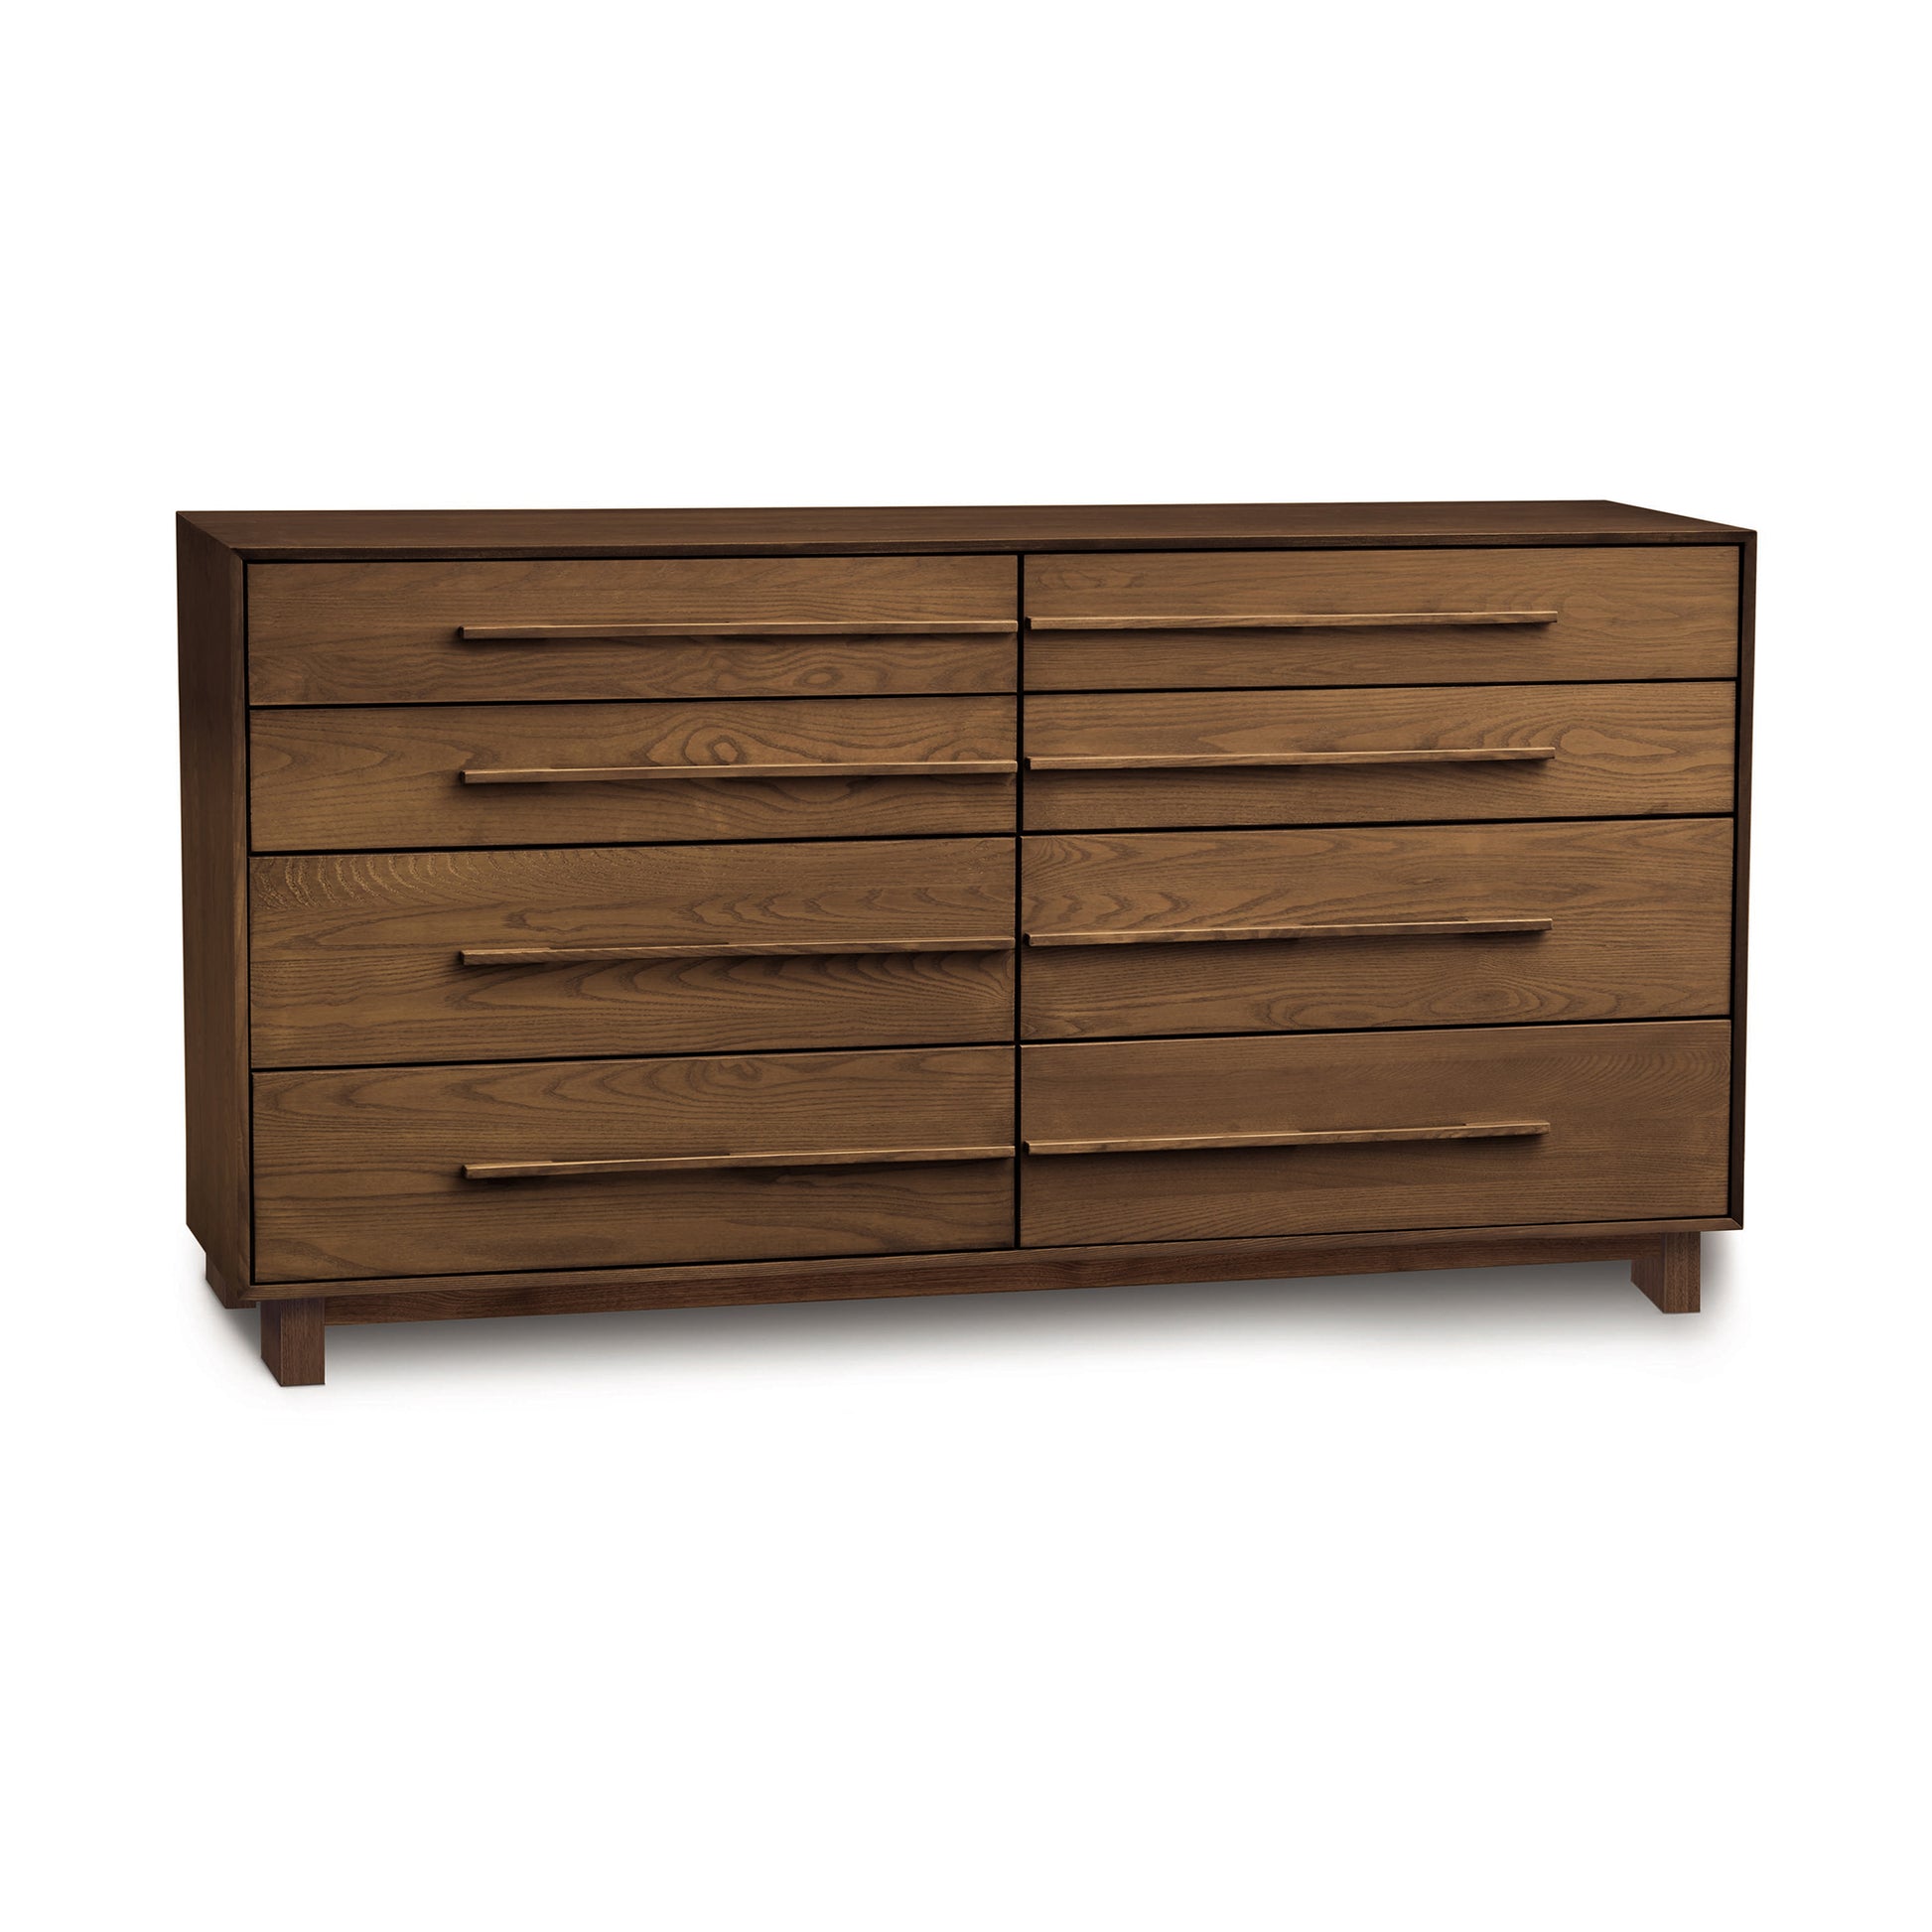 A contemporary wooden dresser, perfect for reducing bedroom clutter. Introducing the Copeland Furniture Sloane 8-Drawer Dresser, designed to add style and organization to any modern space.